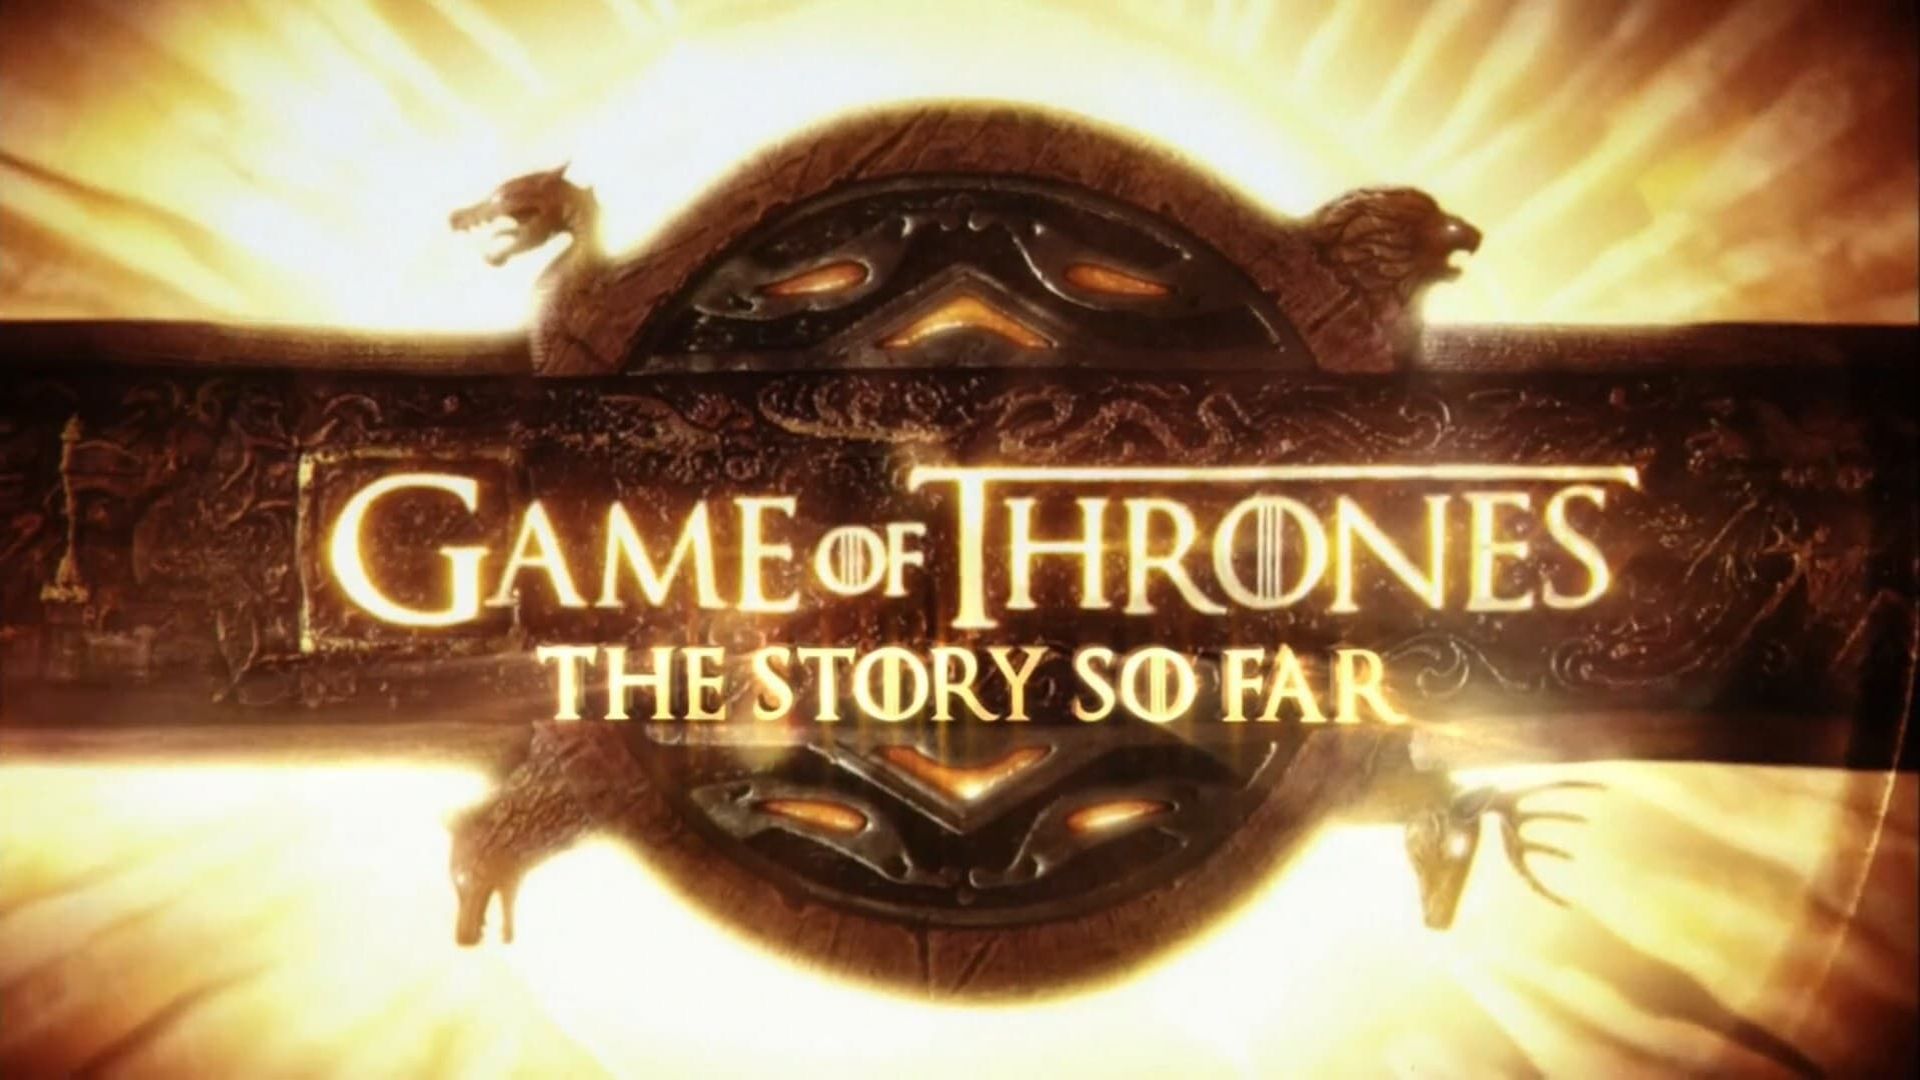 Game of Thrones: The Story So Far background